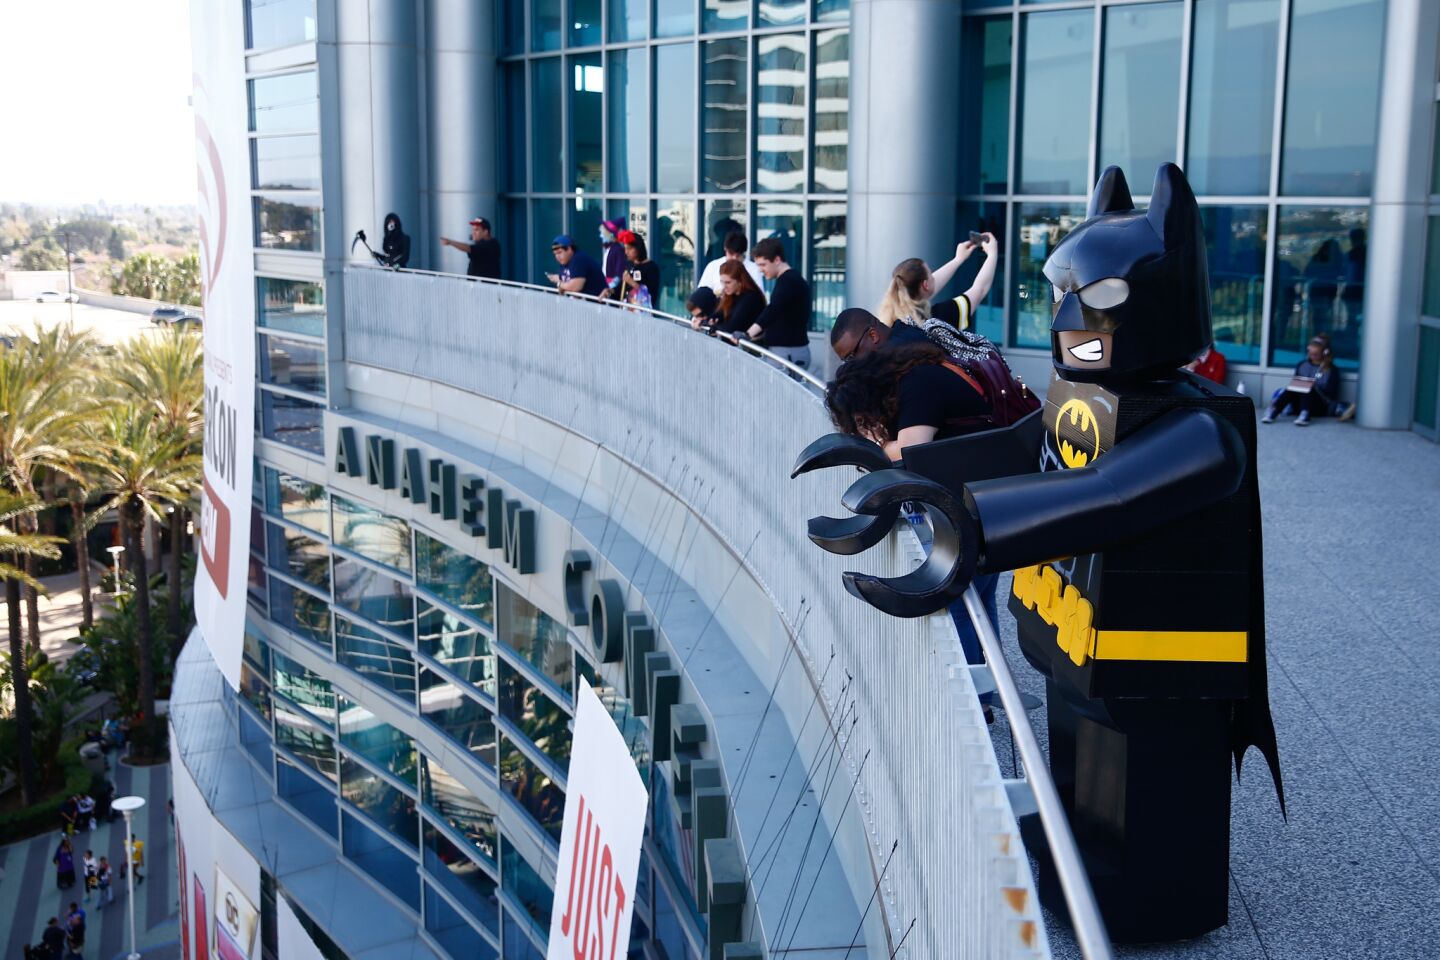 John Lopez, 53, of Palmdale, cosplays as Lego Batman while checking out the scene from a balcony at the Anaheim Convention Center.